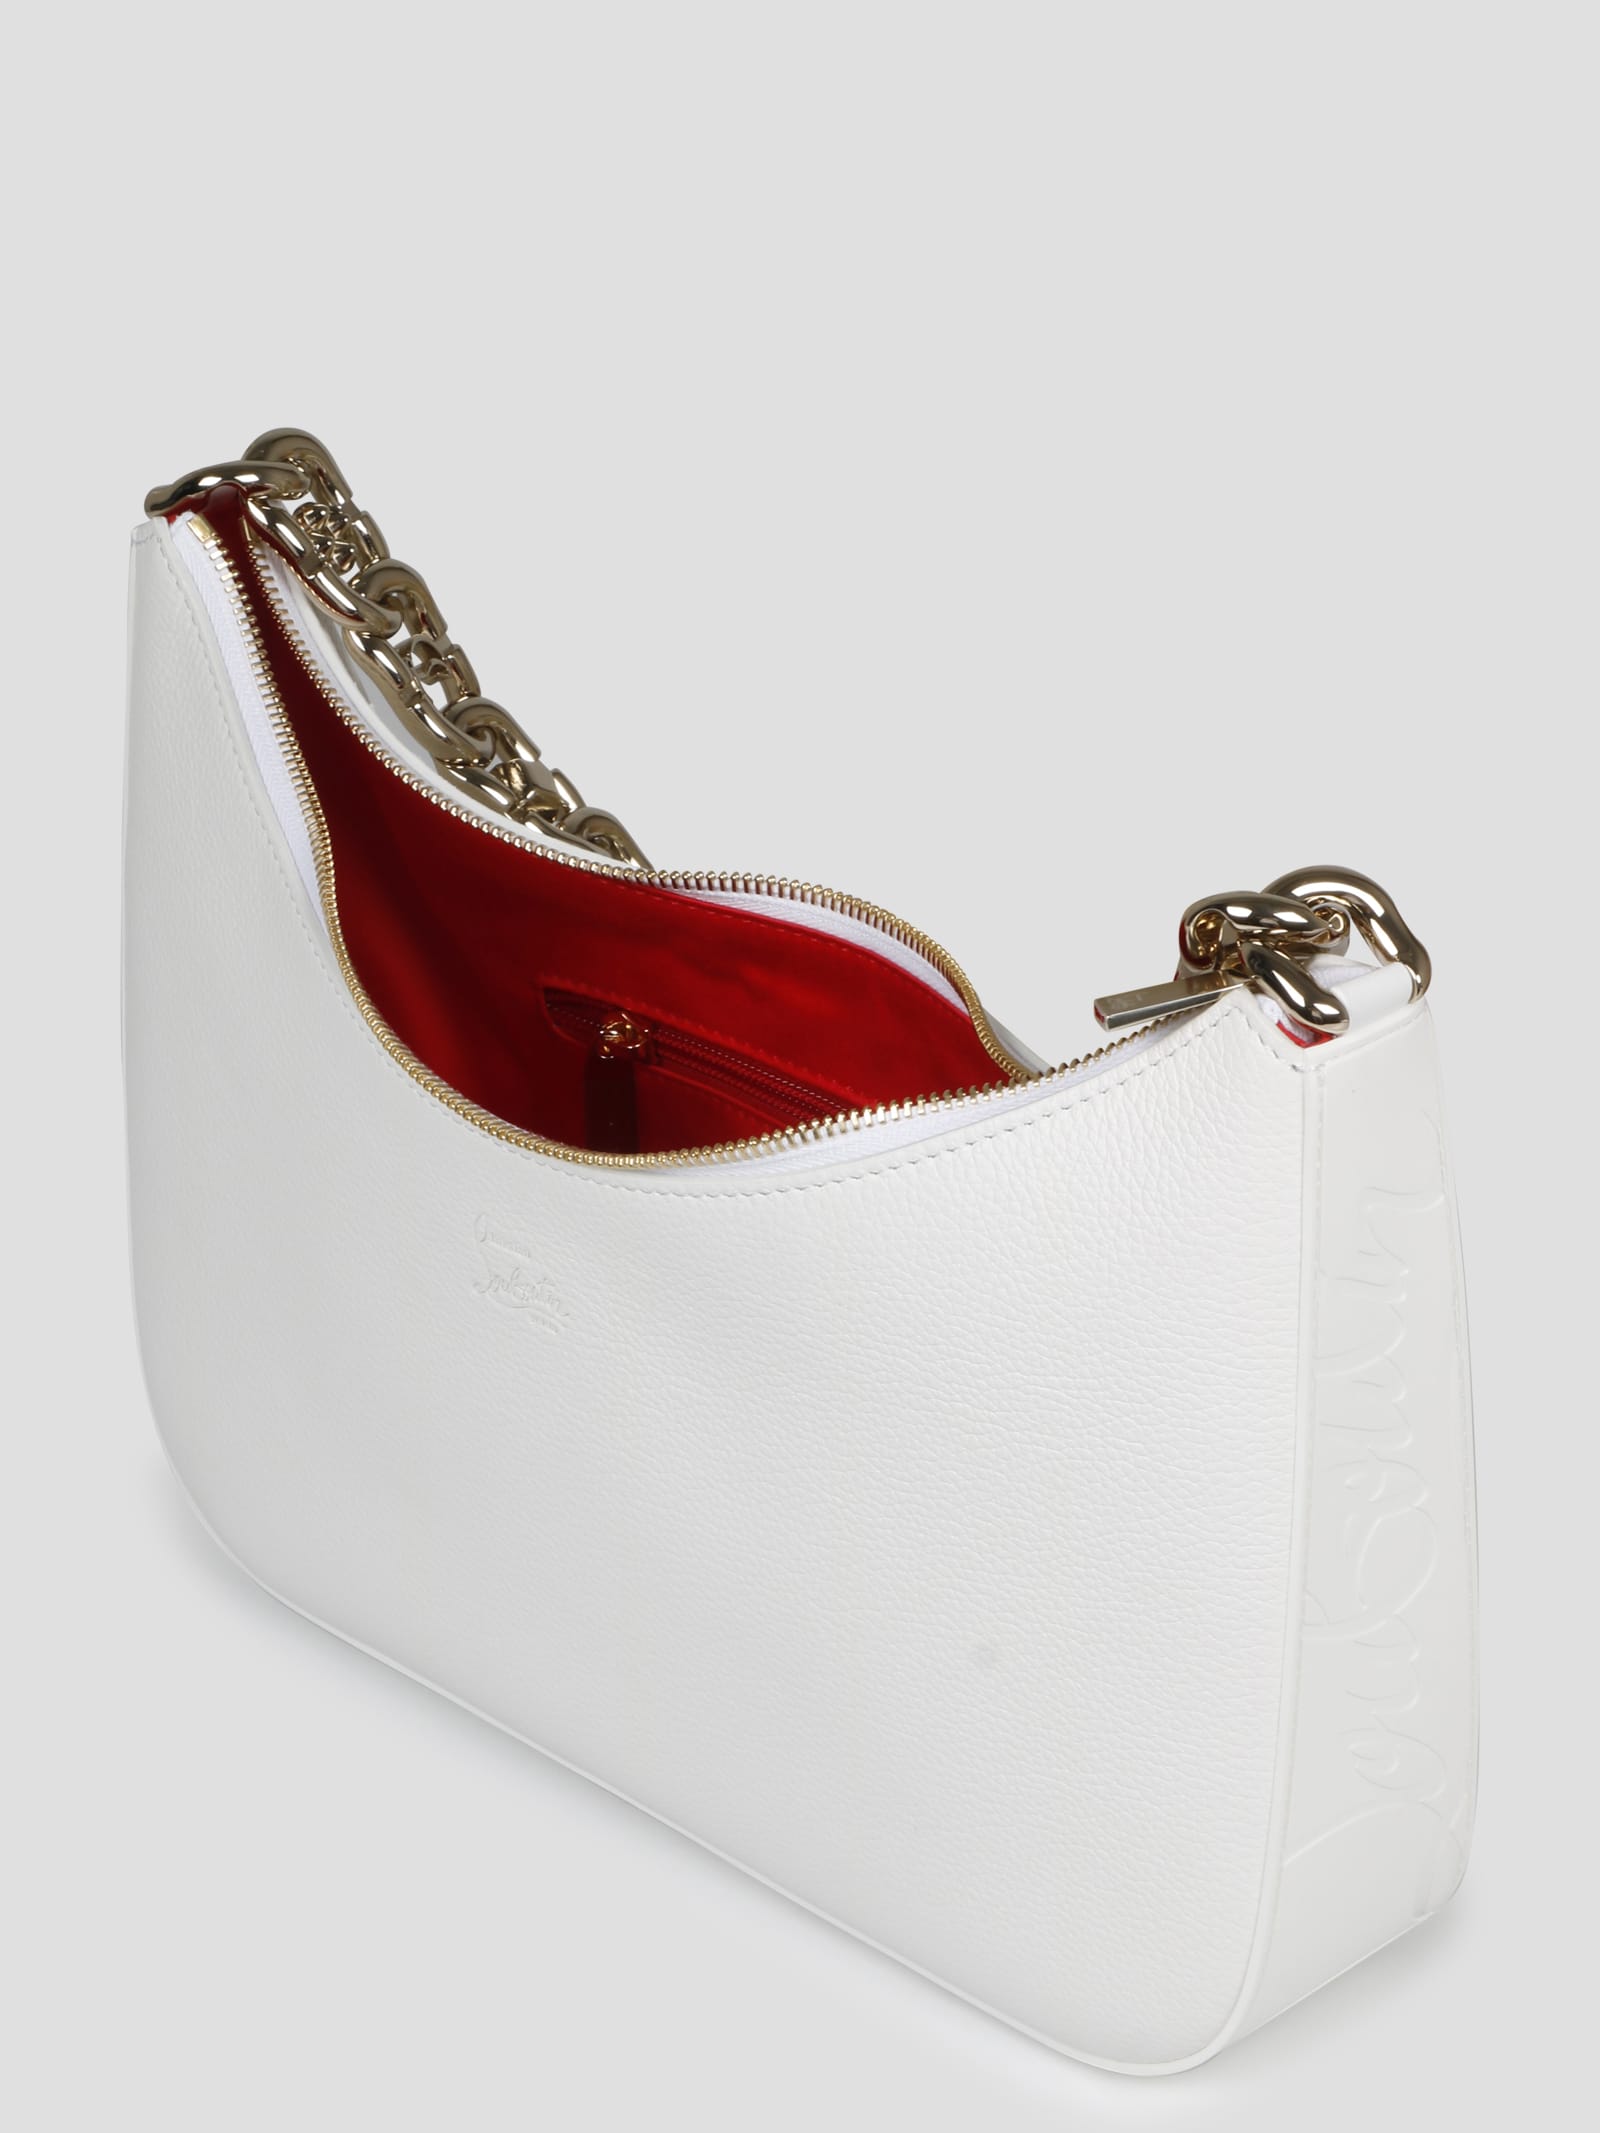 Luxury handbag - Frangibus Christian Louboutin small tote bag in white  fabric and colored inserts